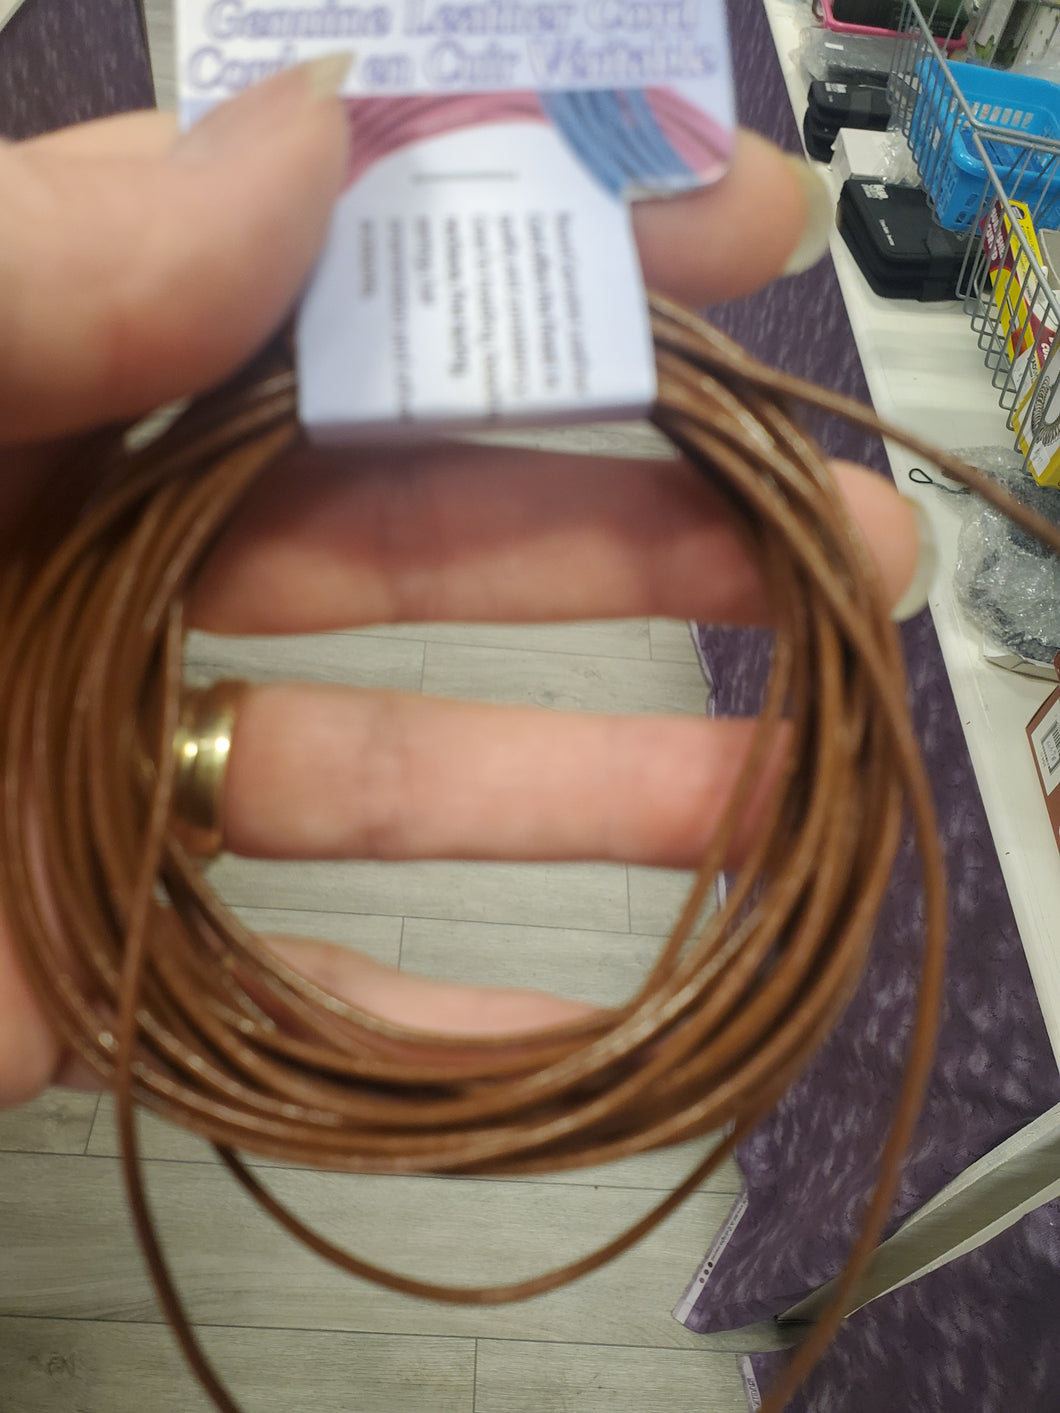 LEATHER CORD BROWN